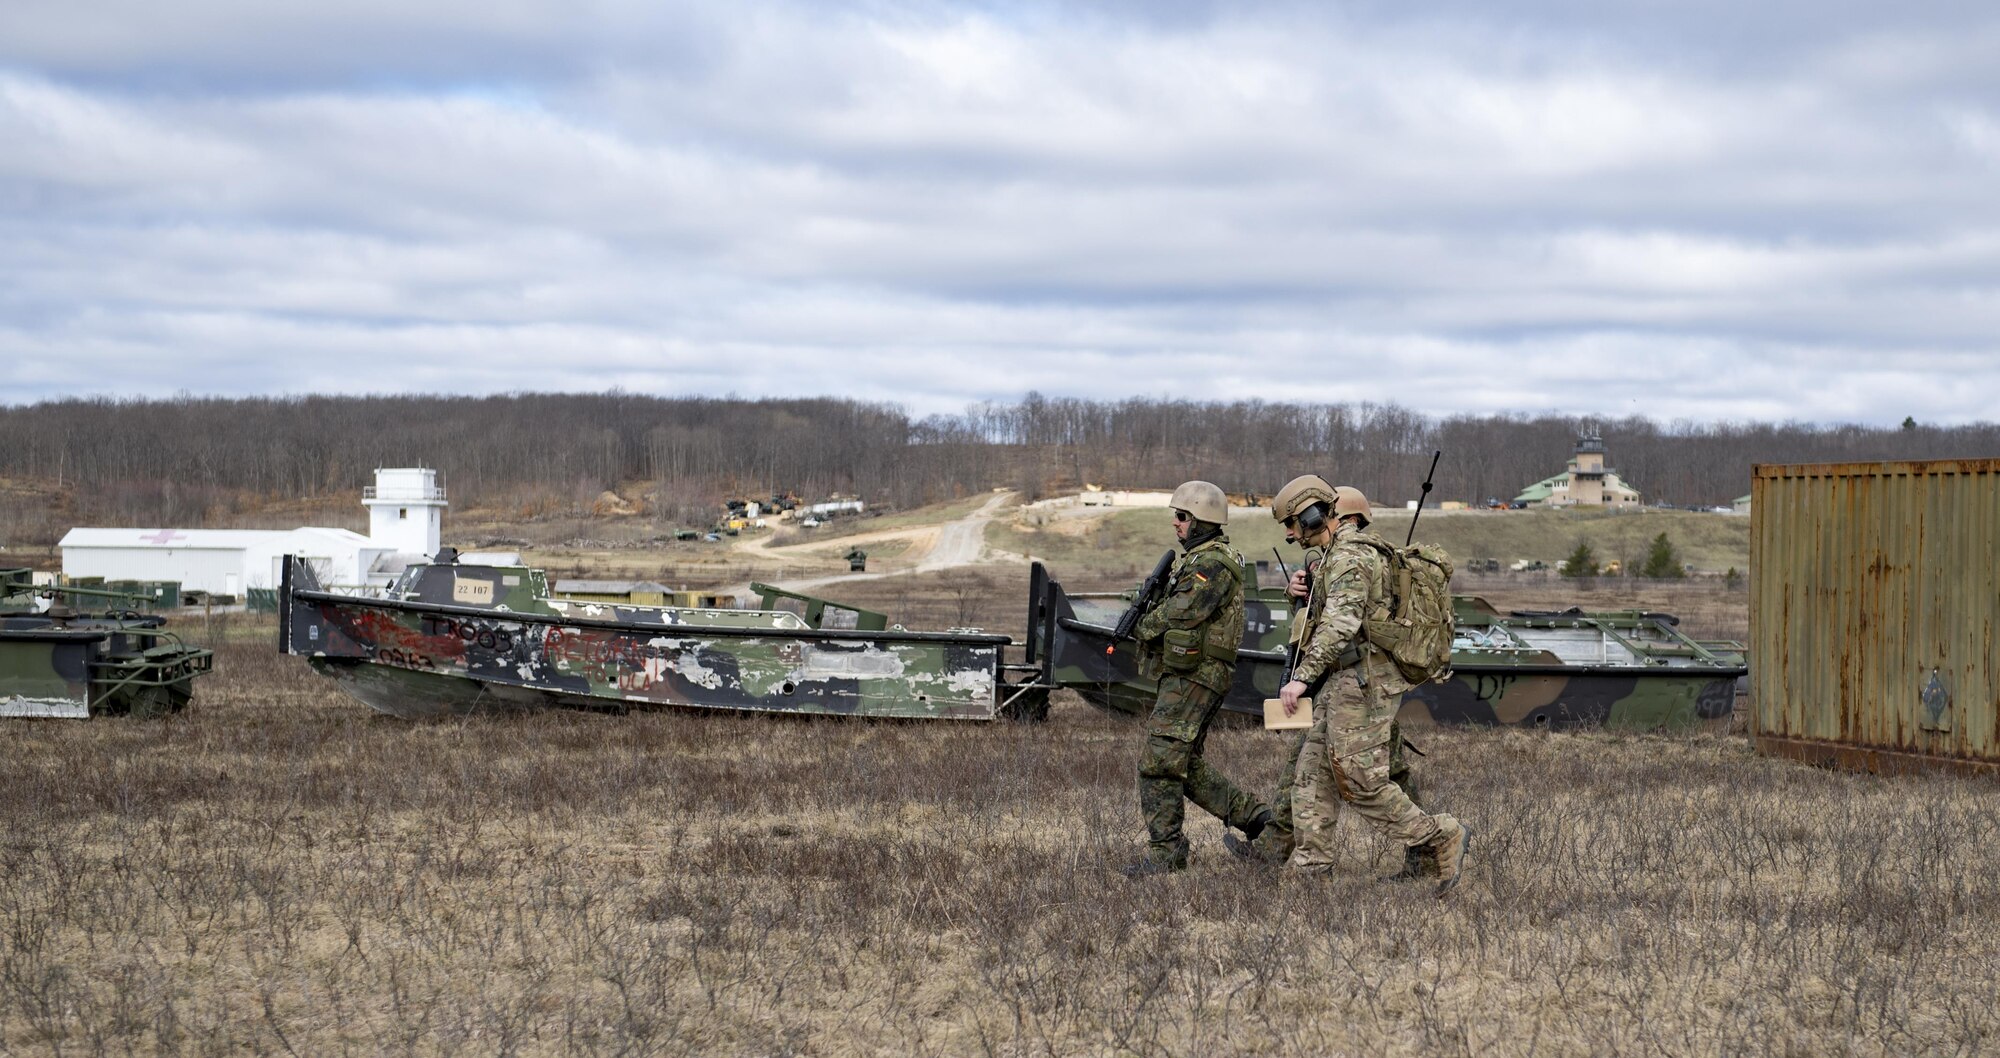 Airmen from the 19th Air Support Operations Squadron and the German air force travel across Camp Grayling, Mich., during a close air support exercise, April 12, 2017. To further build interoperability and hone their unique skillset, members of the German air force Air Ground Operations Squadron travelled to the U.S. to partner with the 19th ASOS and conduct a close air support exercise working with A-10C Thunderbolts IIs and F-16 Fighting Falcons. (U.S. Air Force photo by Airman 1st Class Daniel Snider)